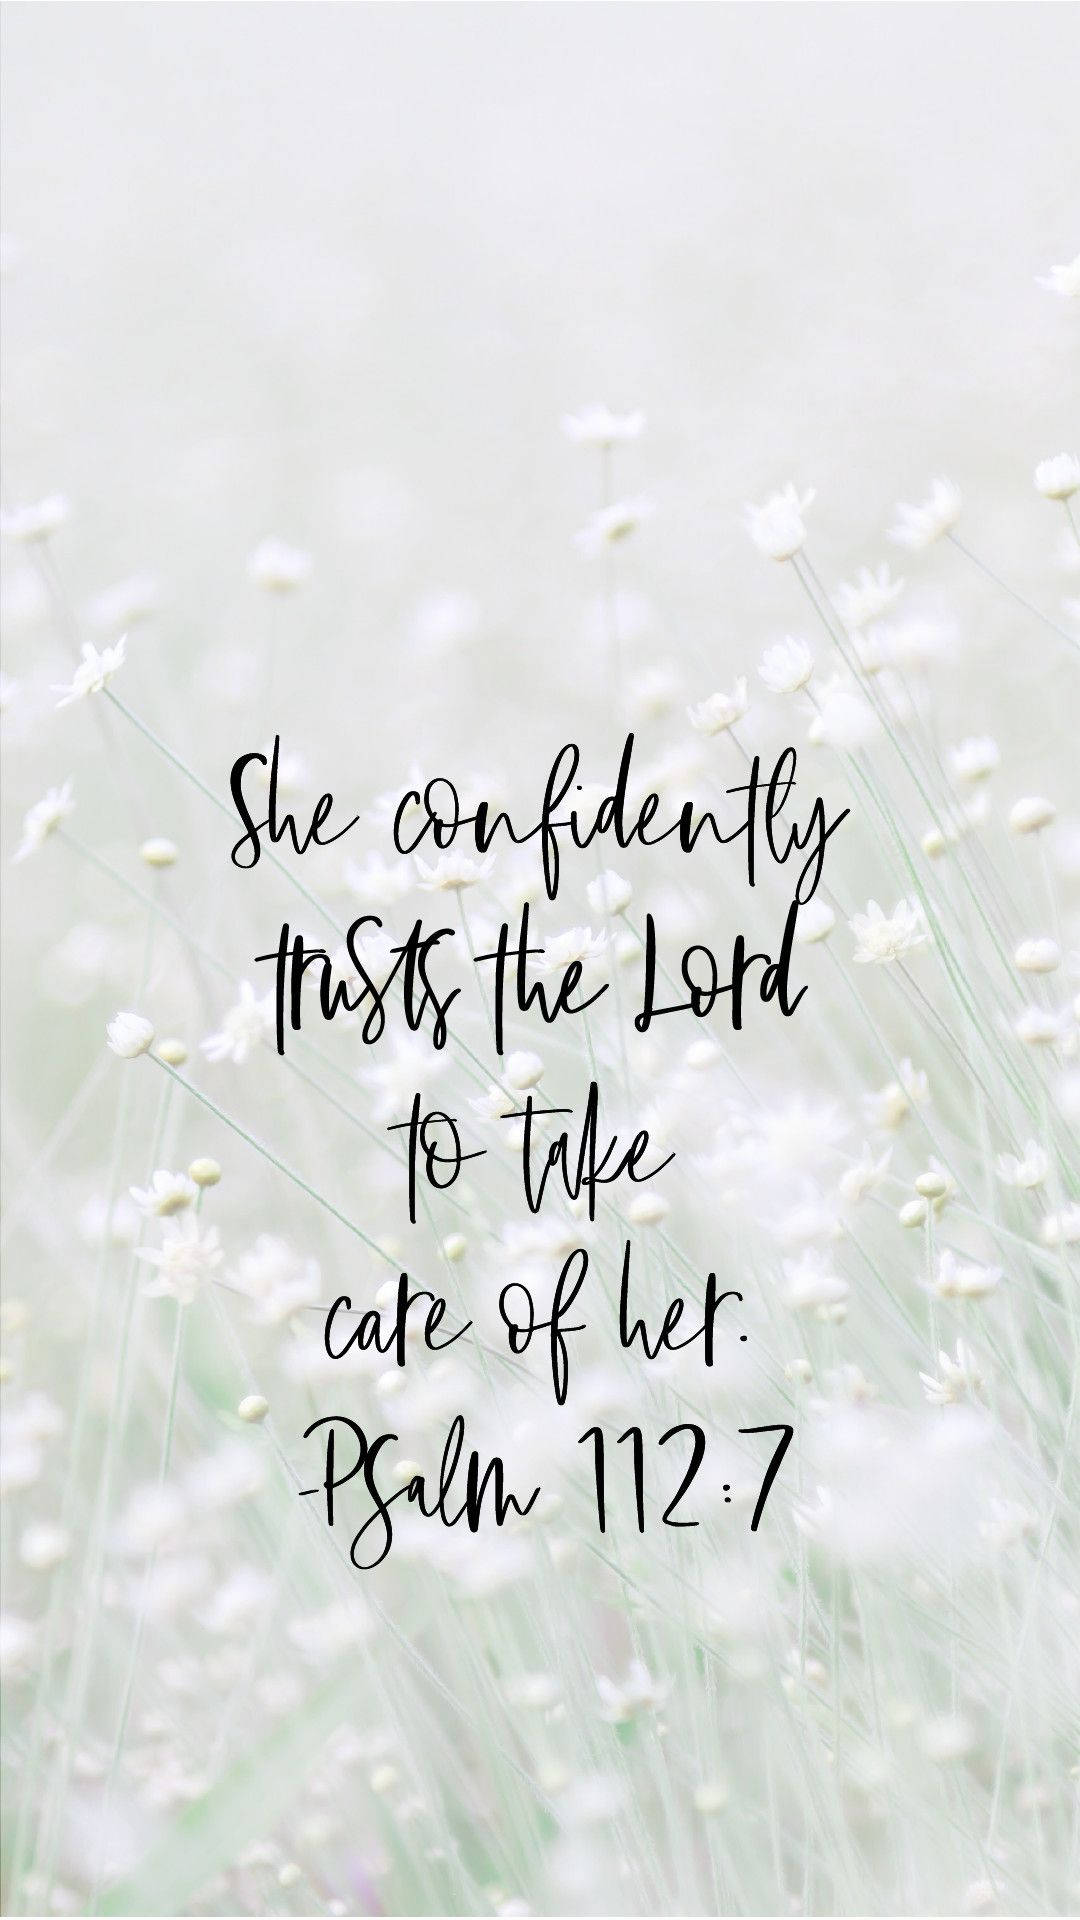 Aesthetic Bible Verse Psalms 112:7 Picture